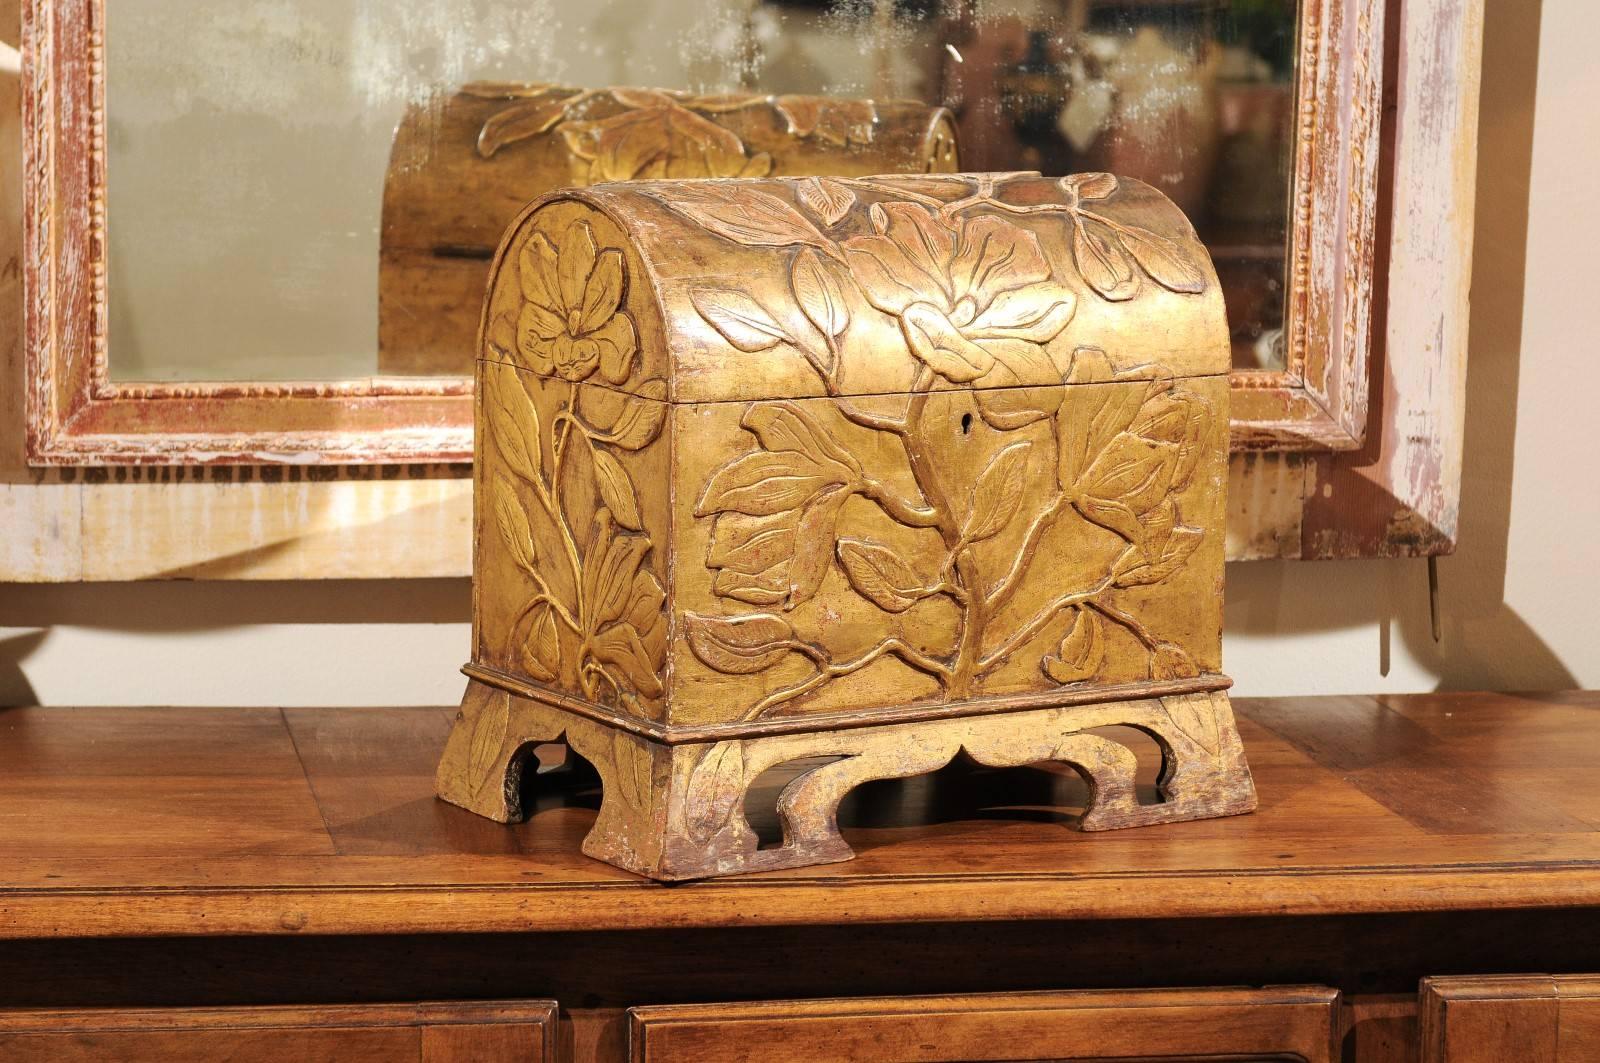 Period Art Nouveau gilded wood coffer, circa 1900.

This is an eye-catching accessory just right for a spot that needs something wonderful. Years of handling have given it an exceptional patina with some bright highlights and an overall glow. The